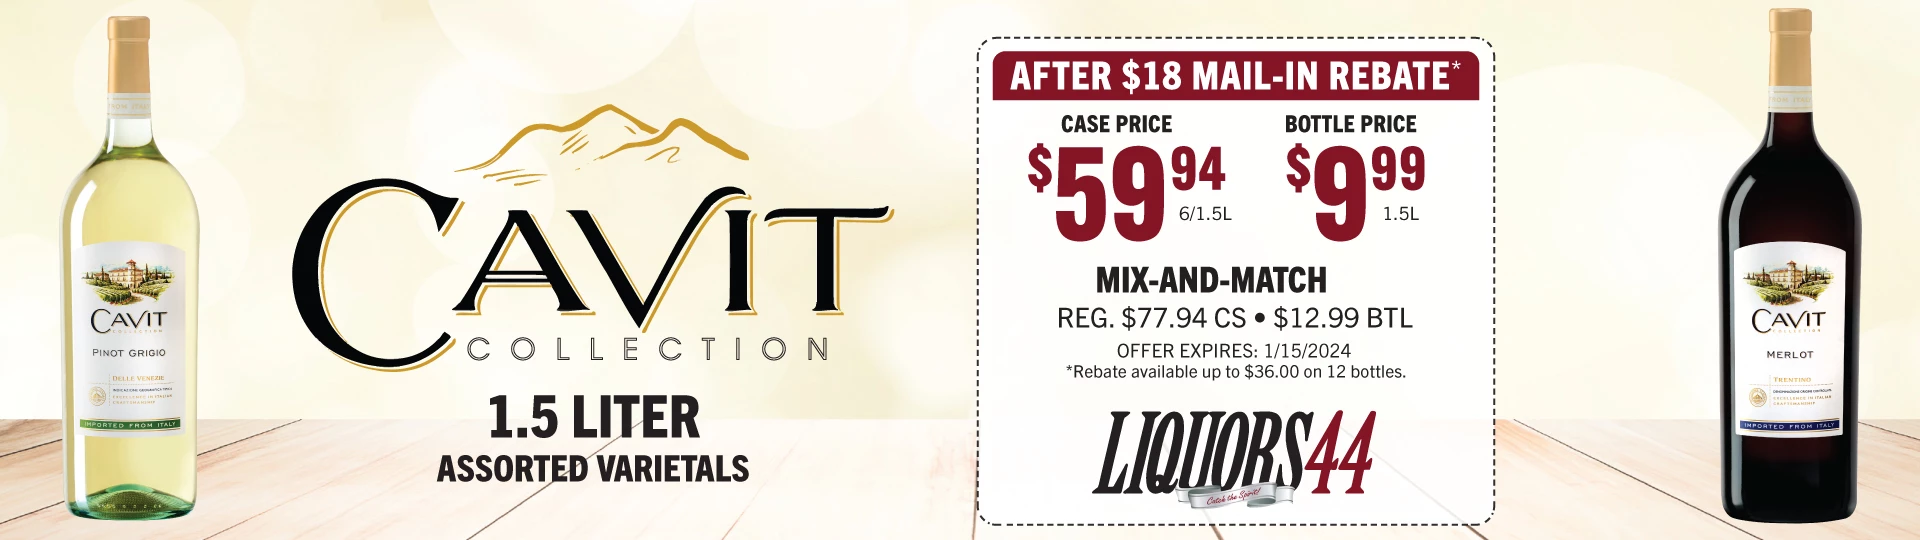 Cavit Wines 1.5 Case Price with Mail in Rebate